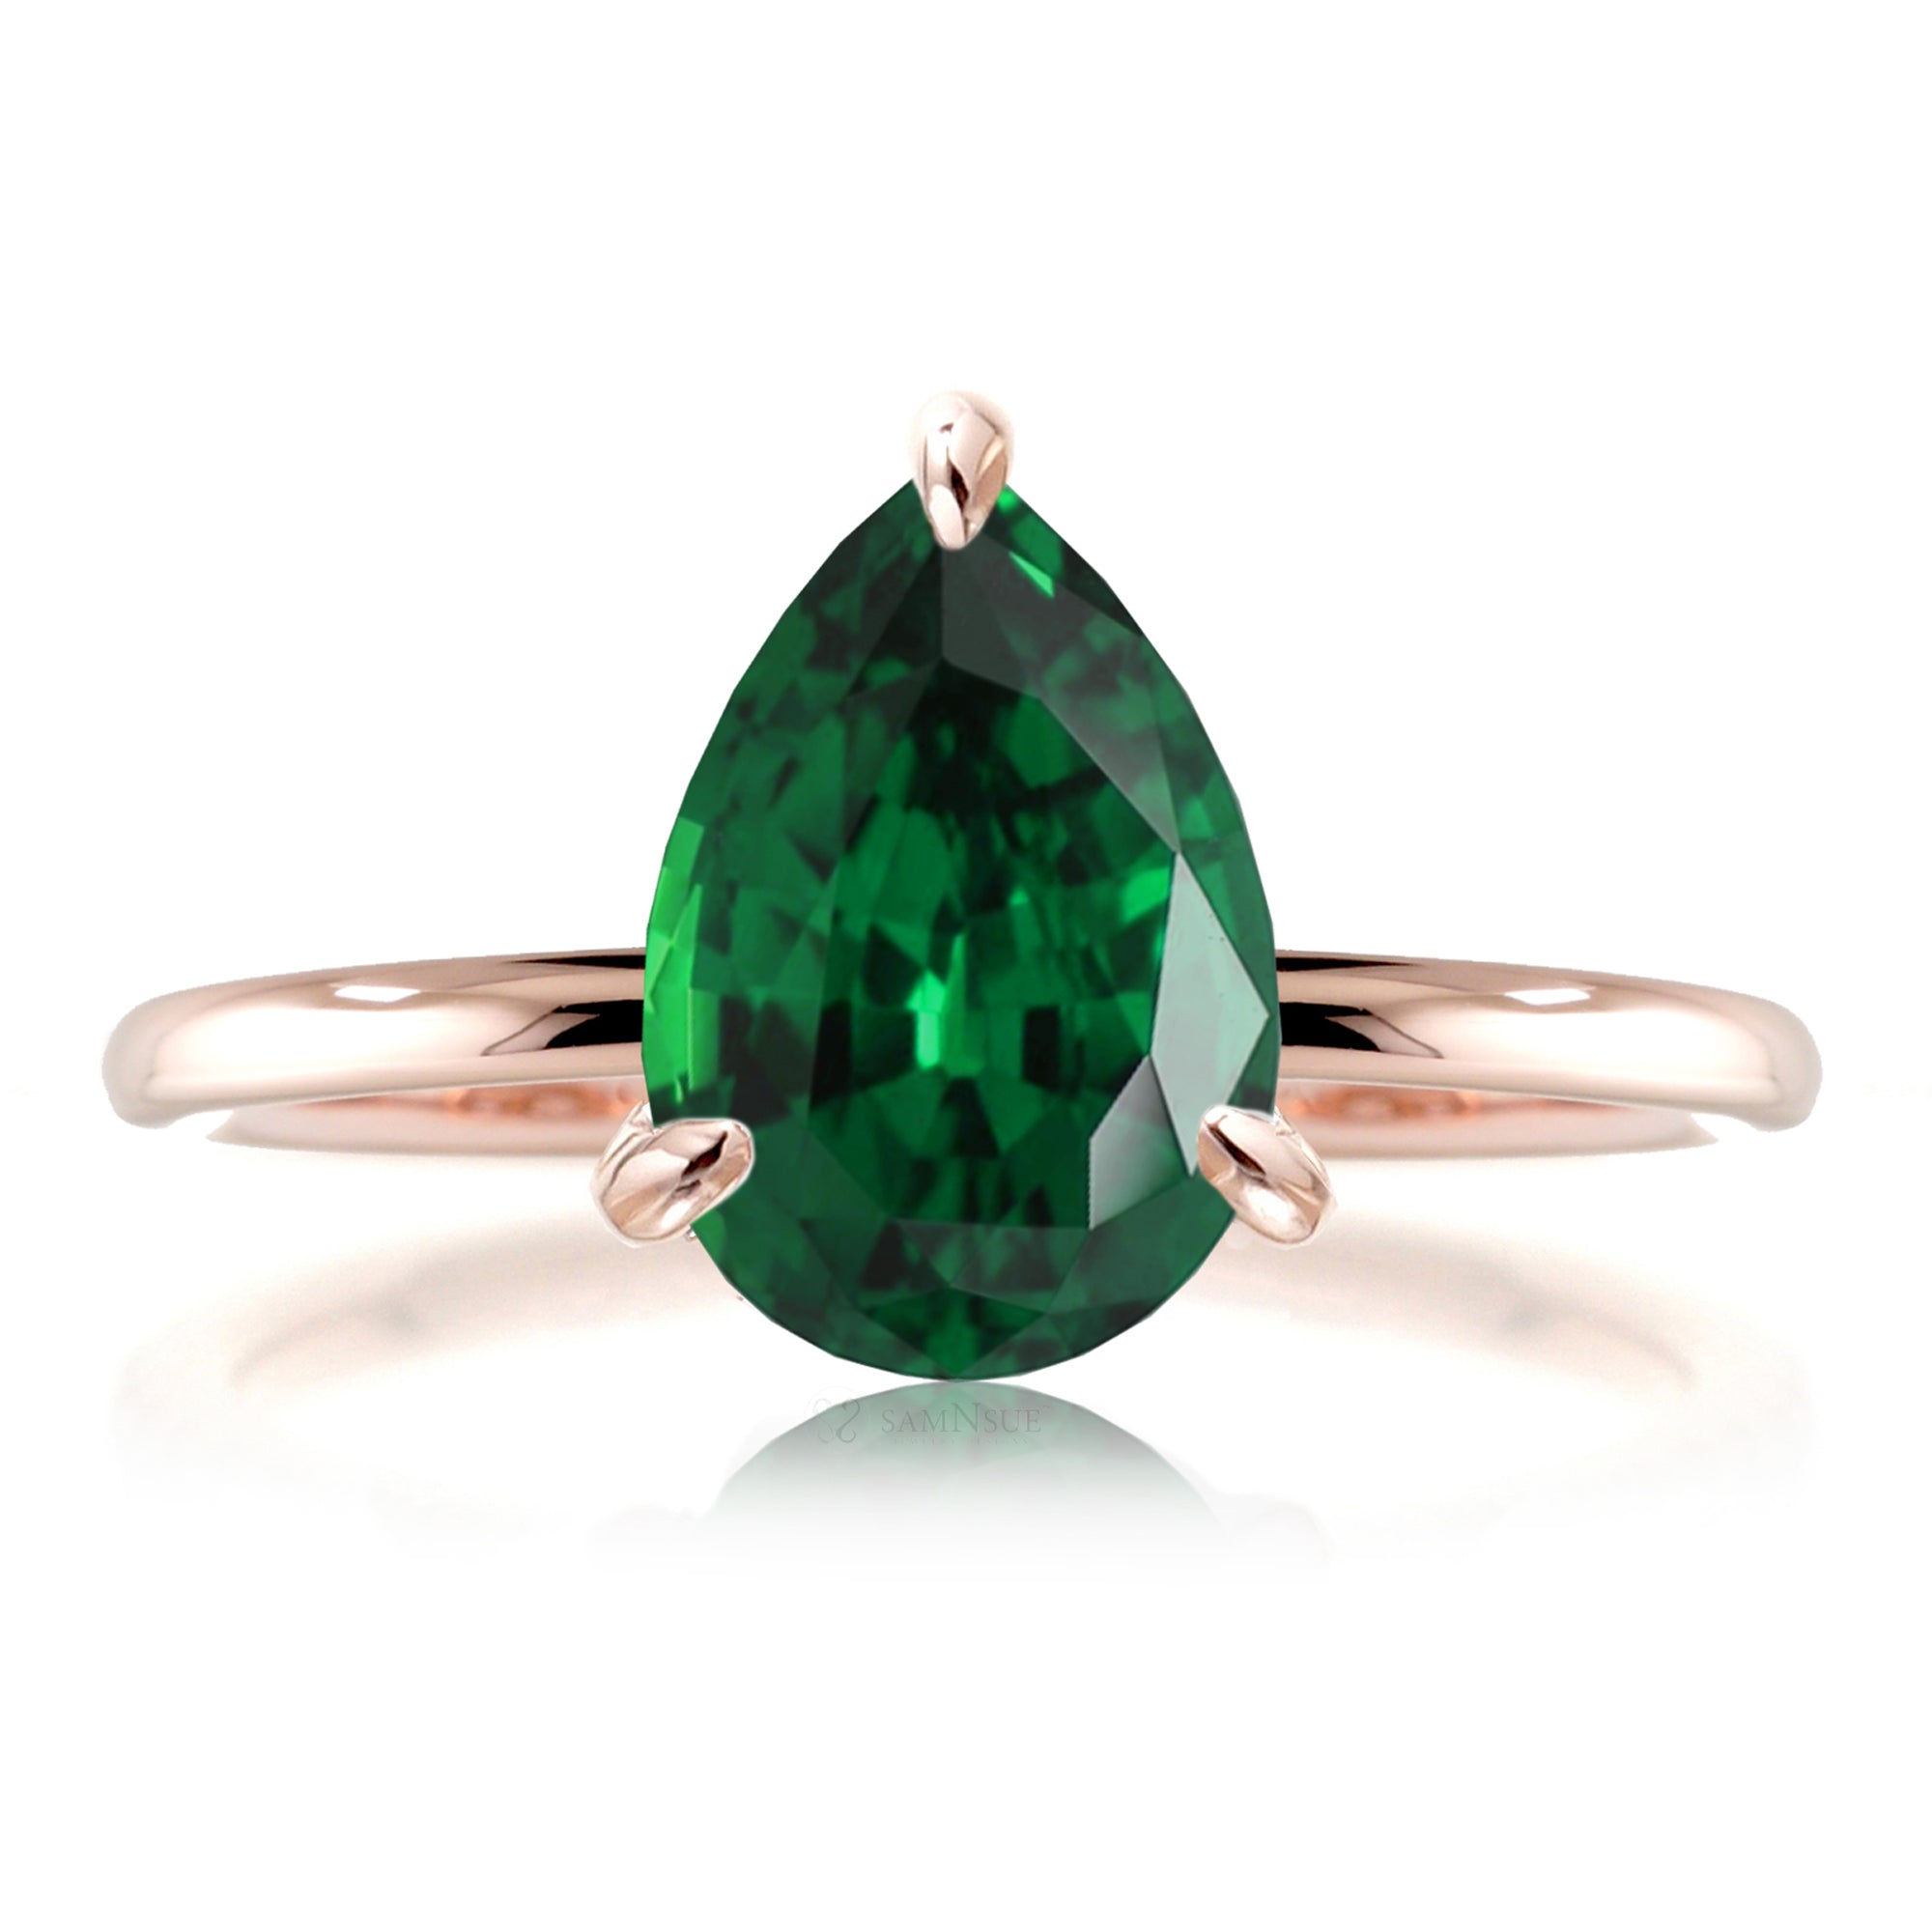 Pear green emerald solid band engagement ring rose gold - the Ava